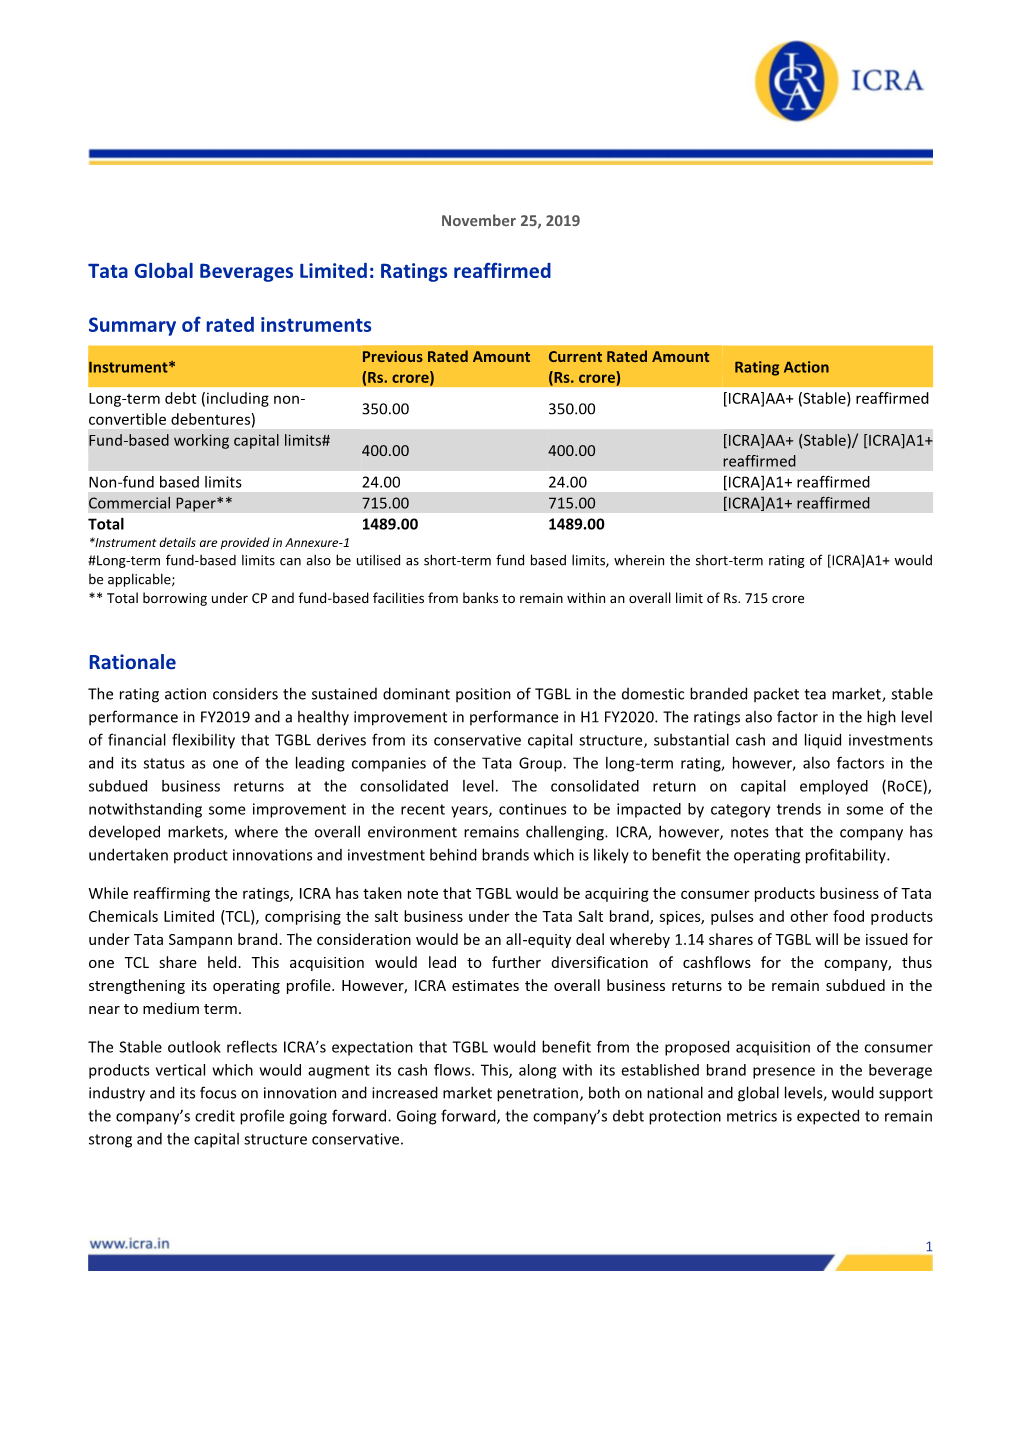 Tata Global Beverages Limited: Ratings Reaffirmed Summary Of